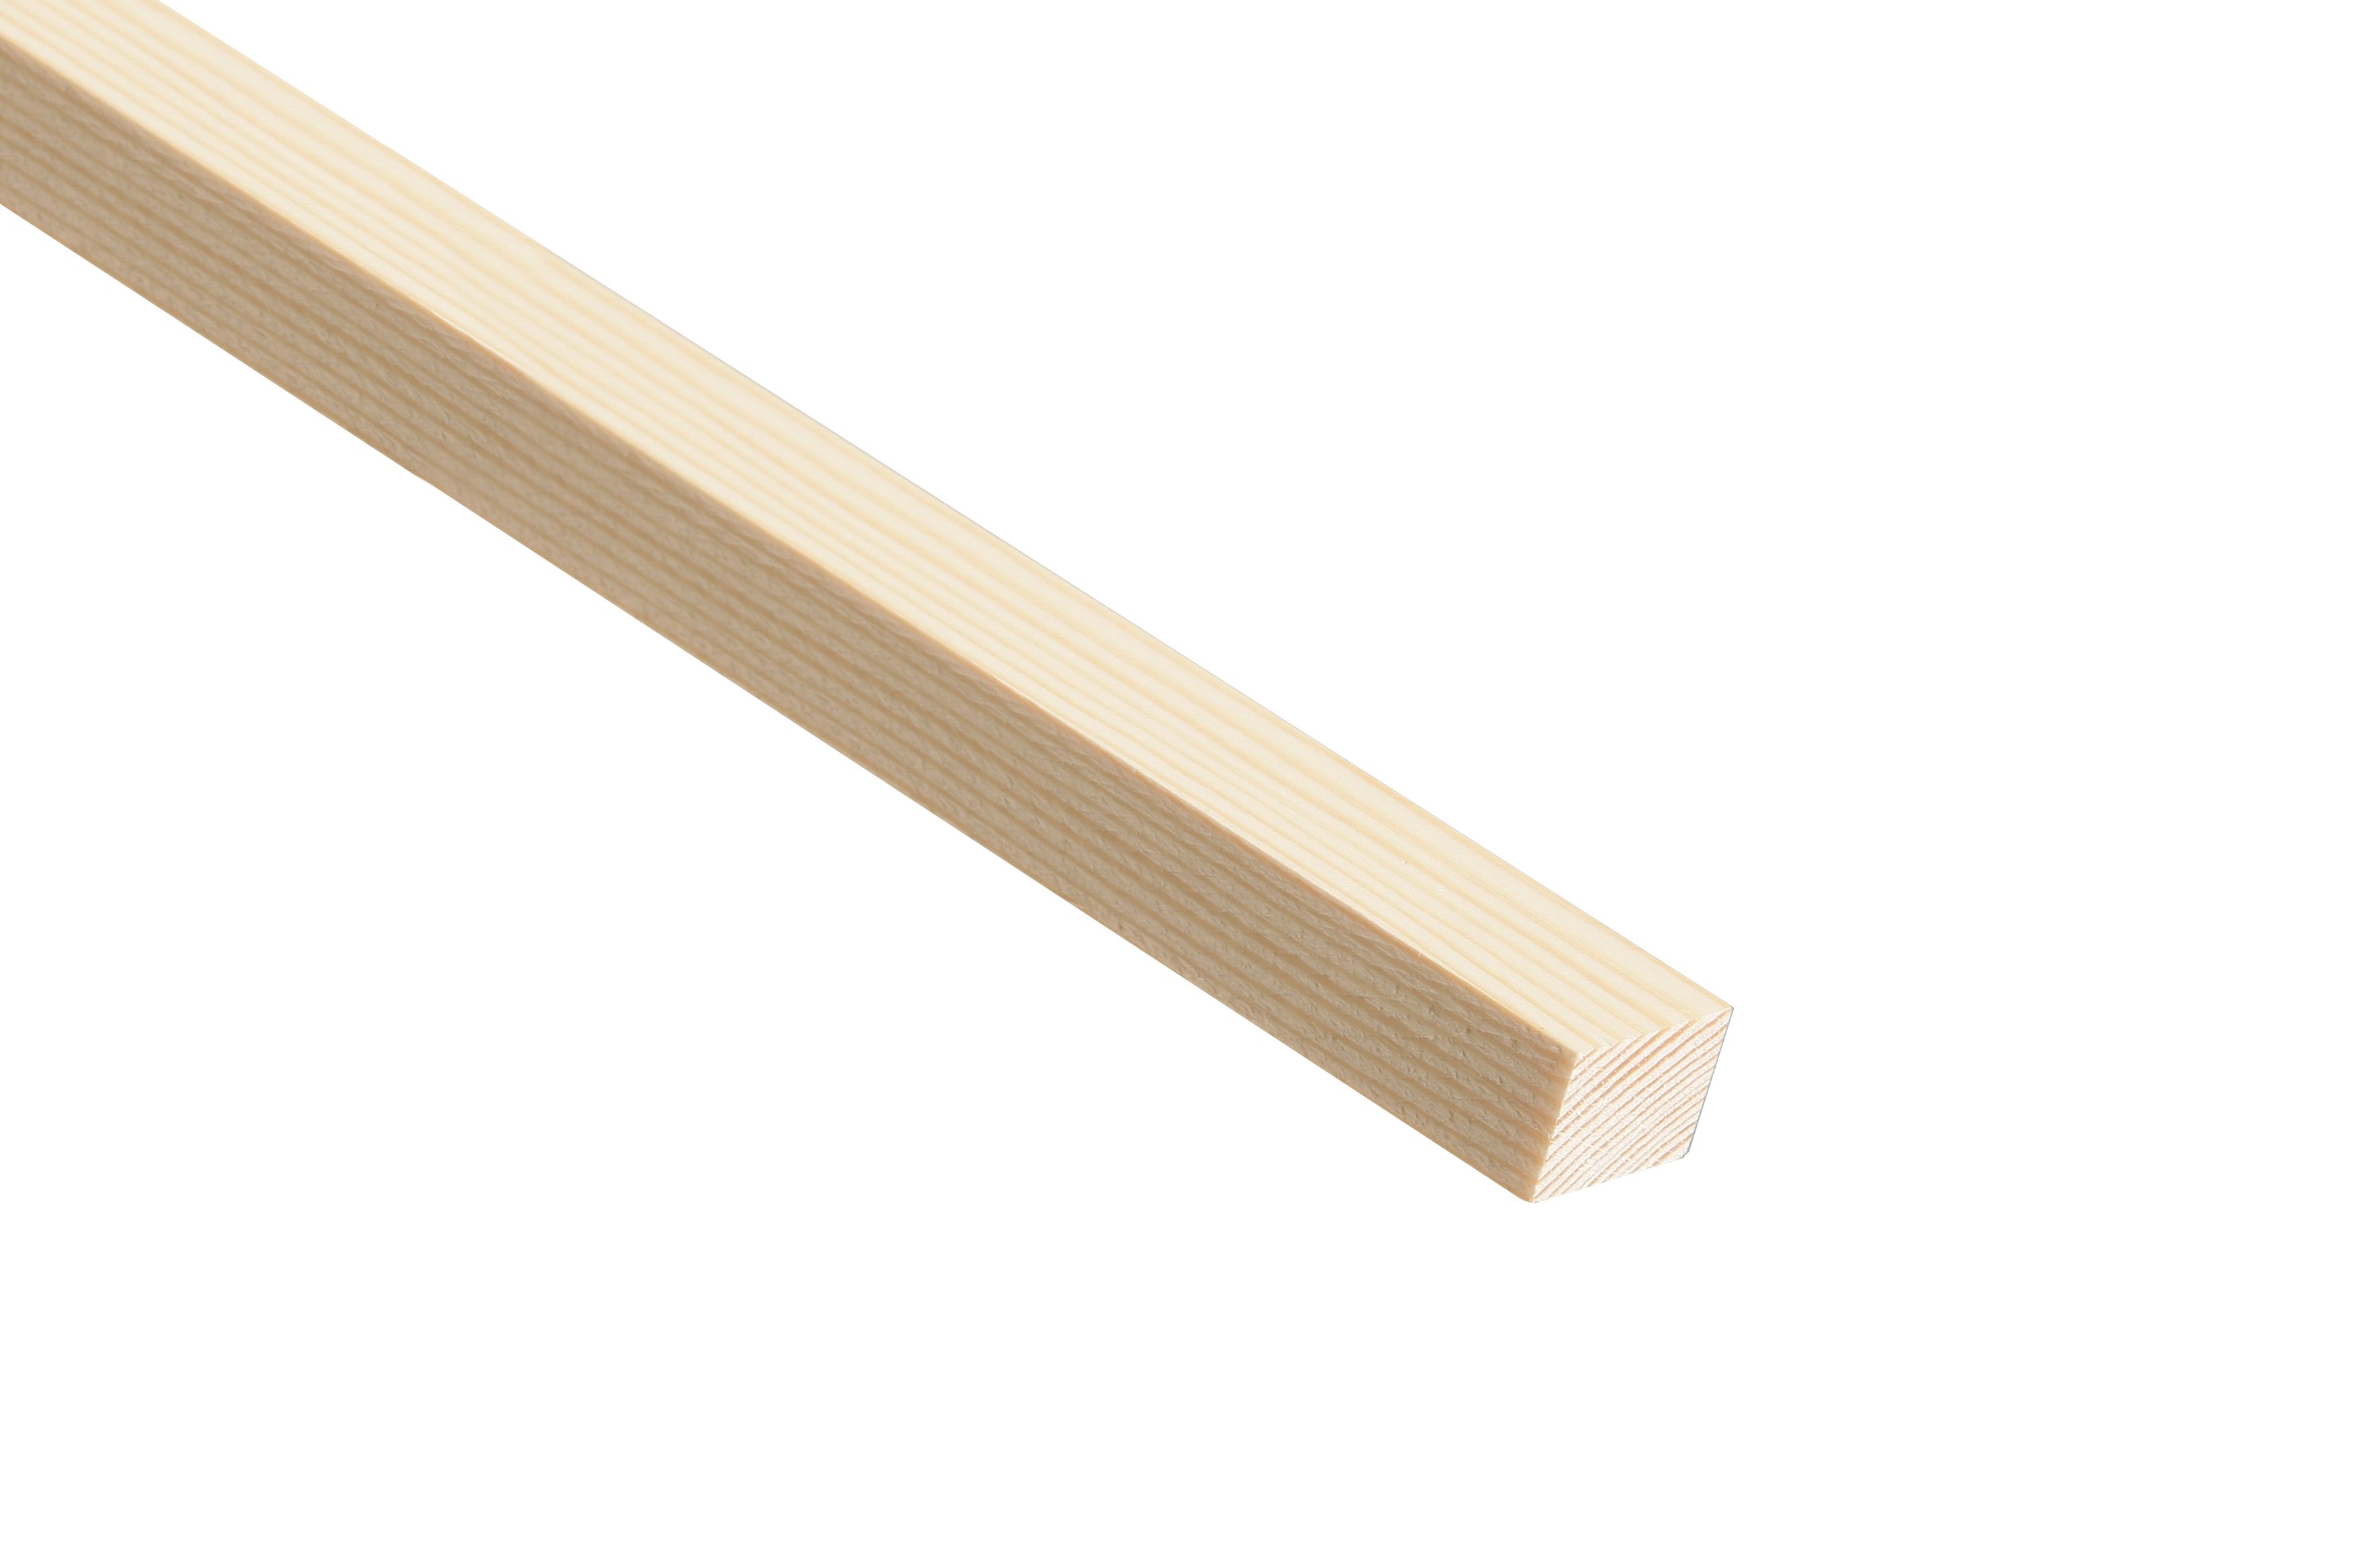 Image of Wickes Pine Stripwood Moulding (PSE) - 15 x 25 x 2400mm